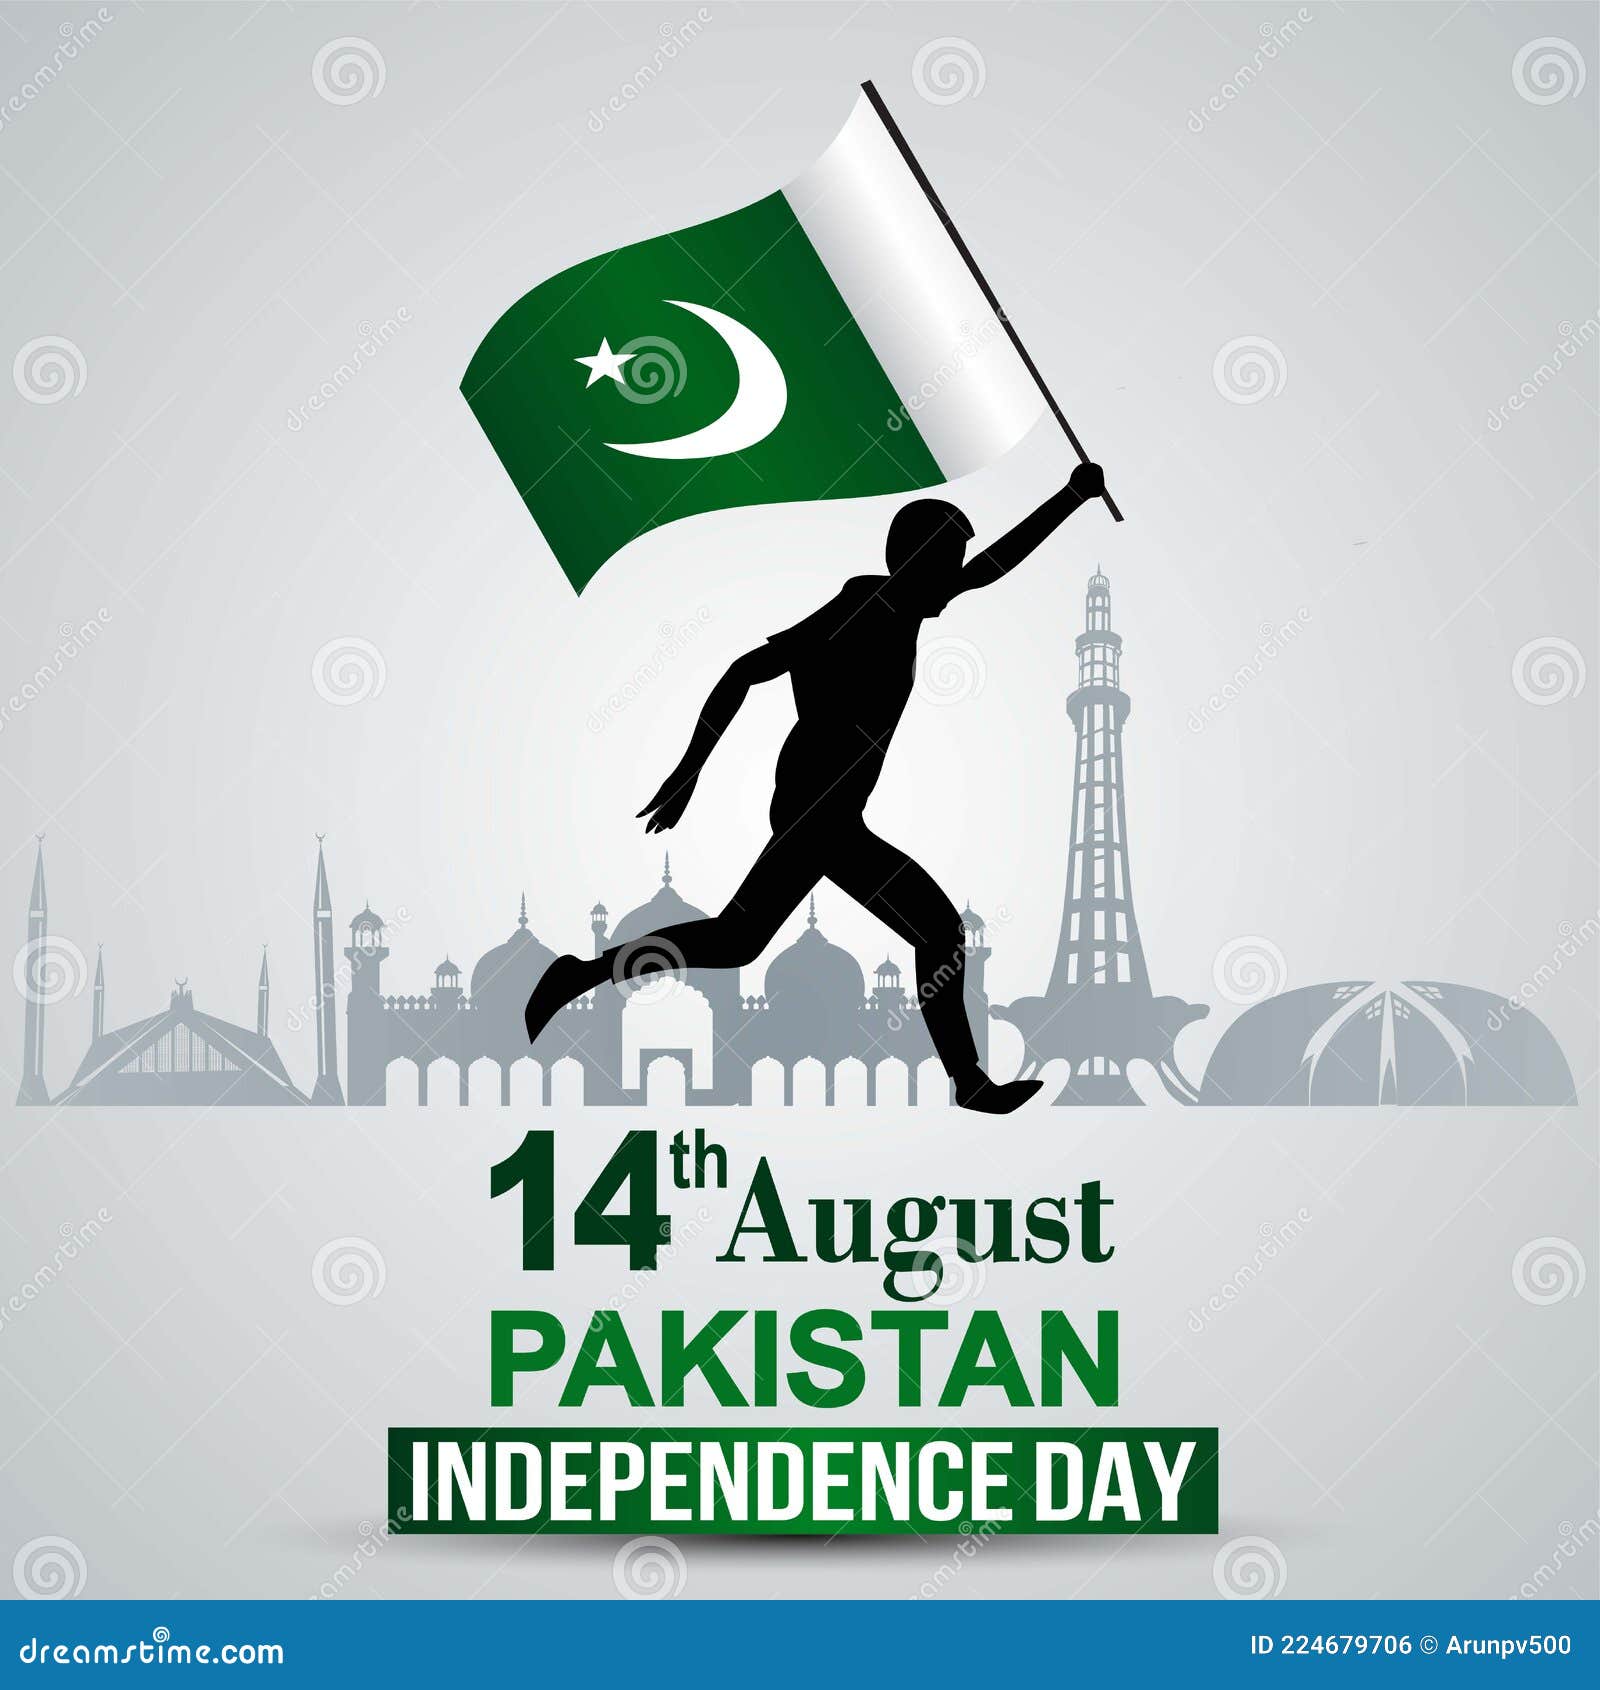 Happy Independence Day Pakistan Vector Template Design Illustration